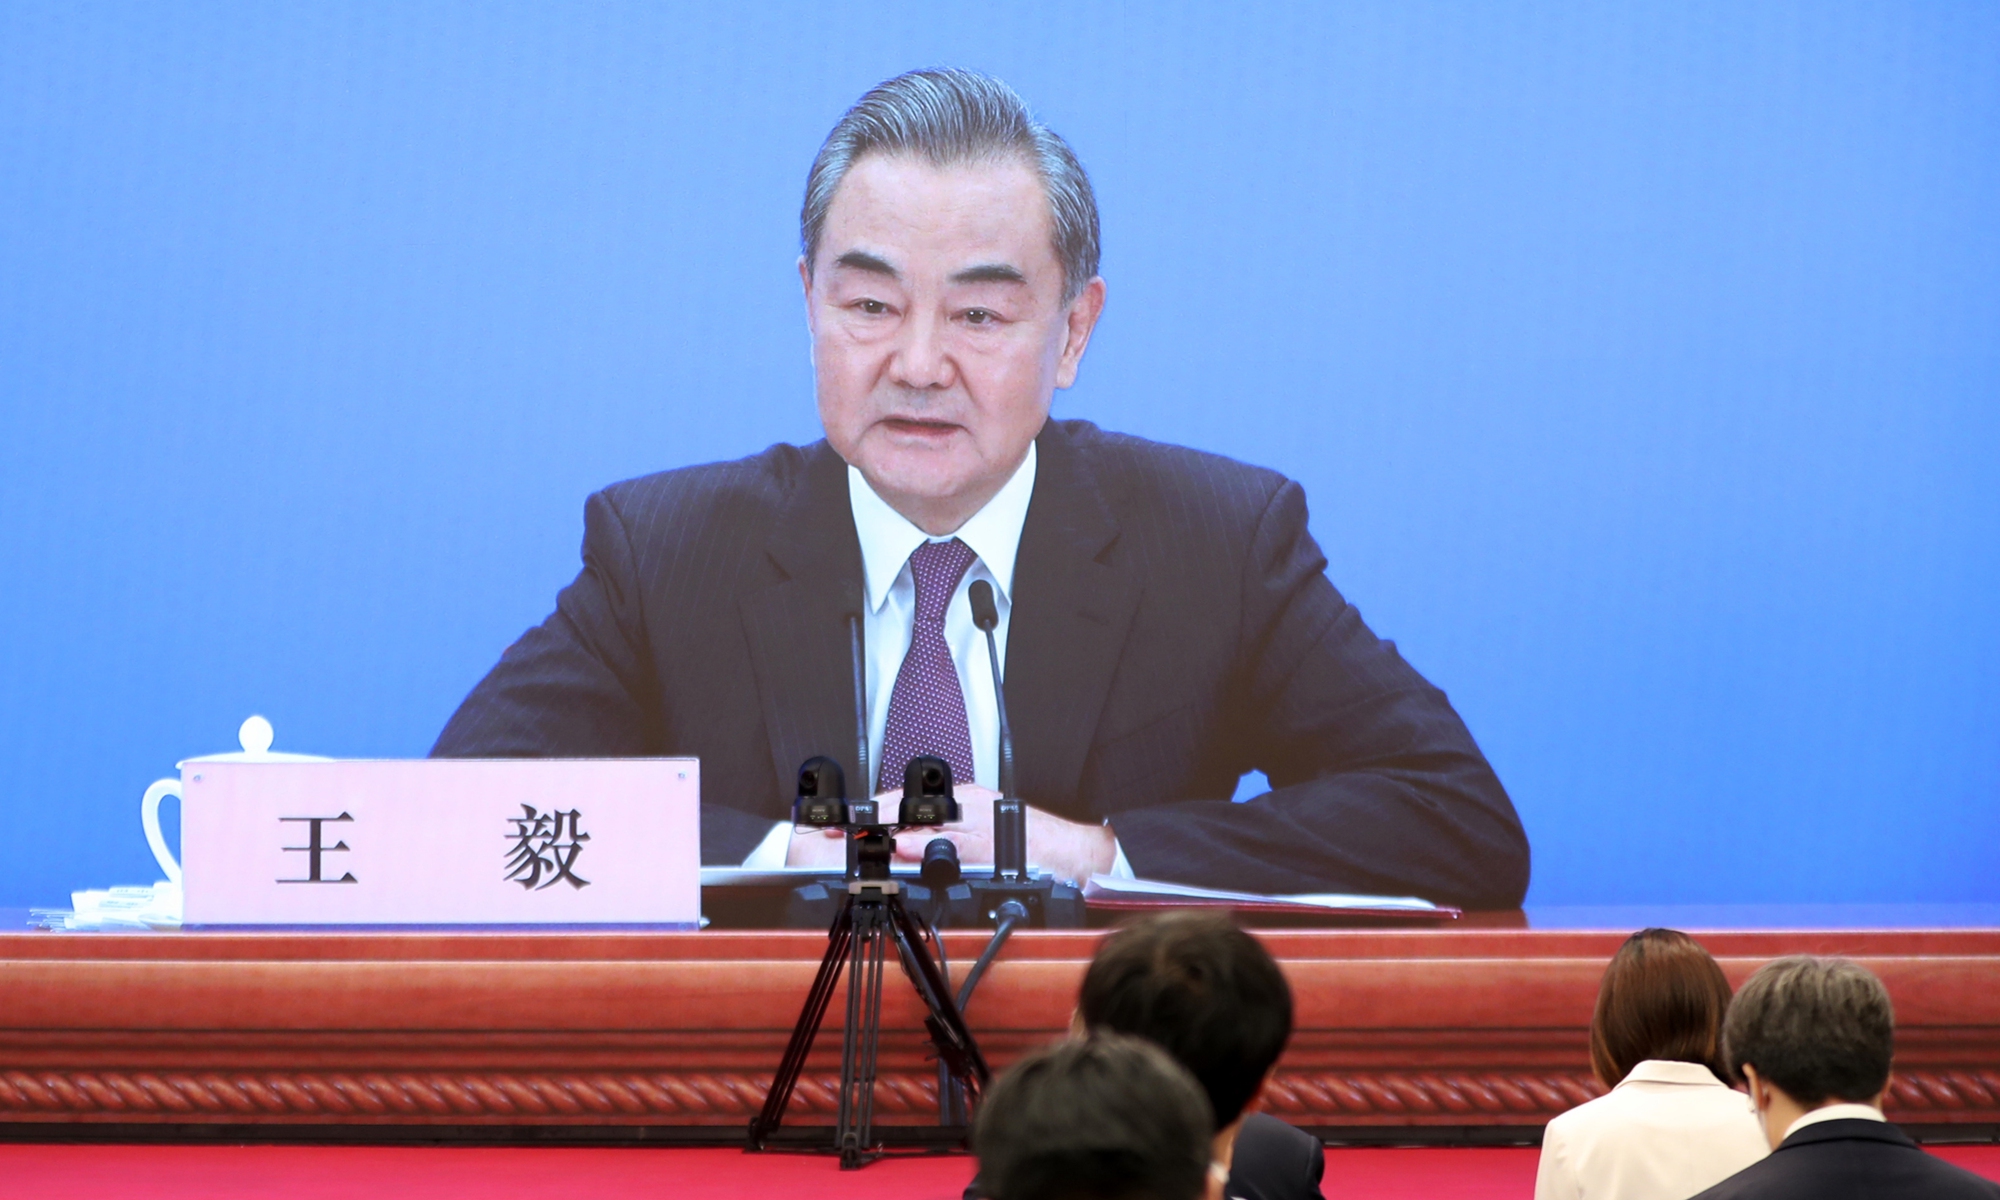 Chinese State Councilor and Foreign Minister Wang Yi holds a press conference Sunday afternoon on the sidelines of the fourth session of the 13th National People's Congress. Wang took questions of journalists from home and abroad on China's foreign policy and foreign relations. Photo: cnsphoto